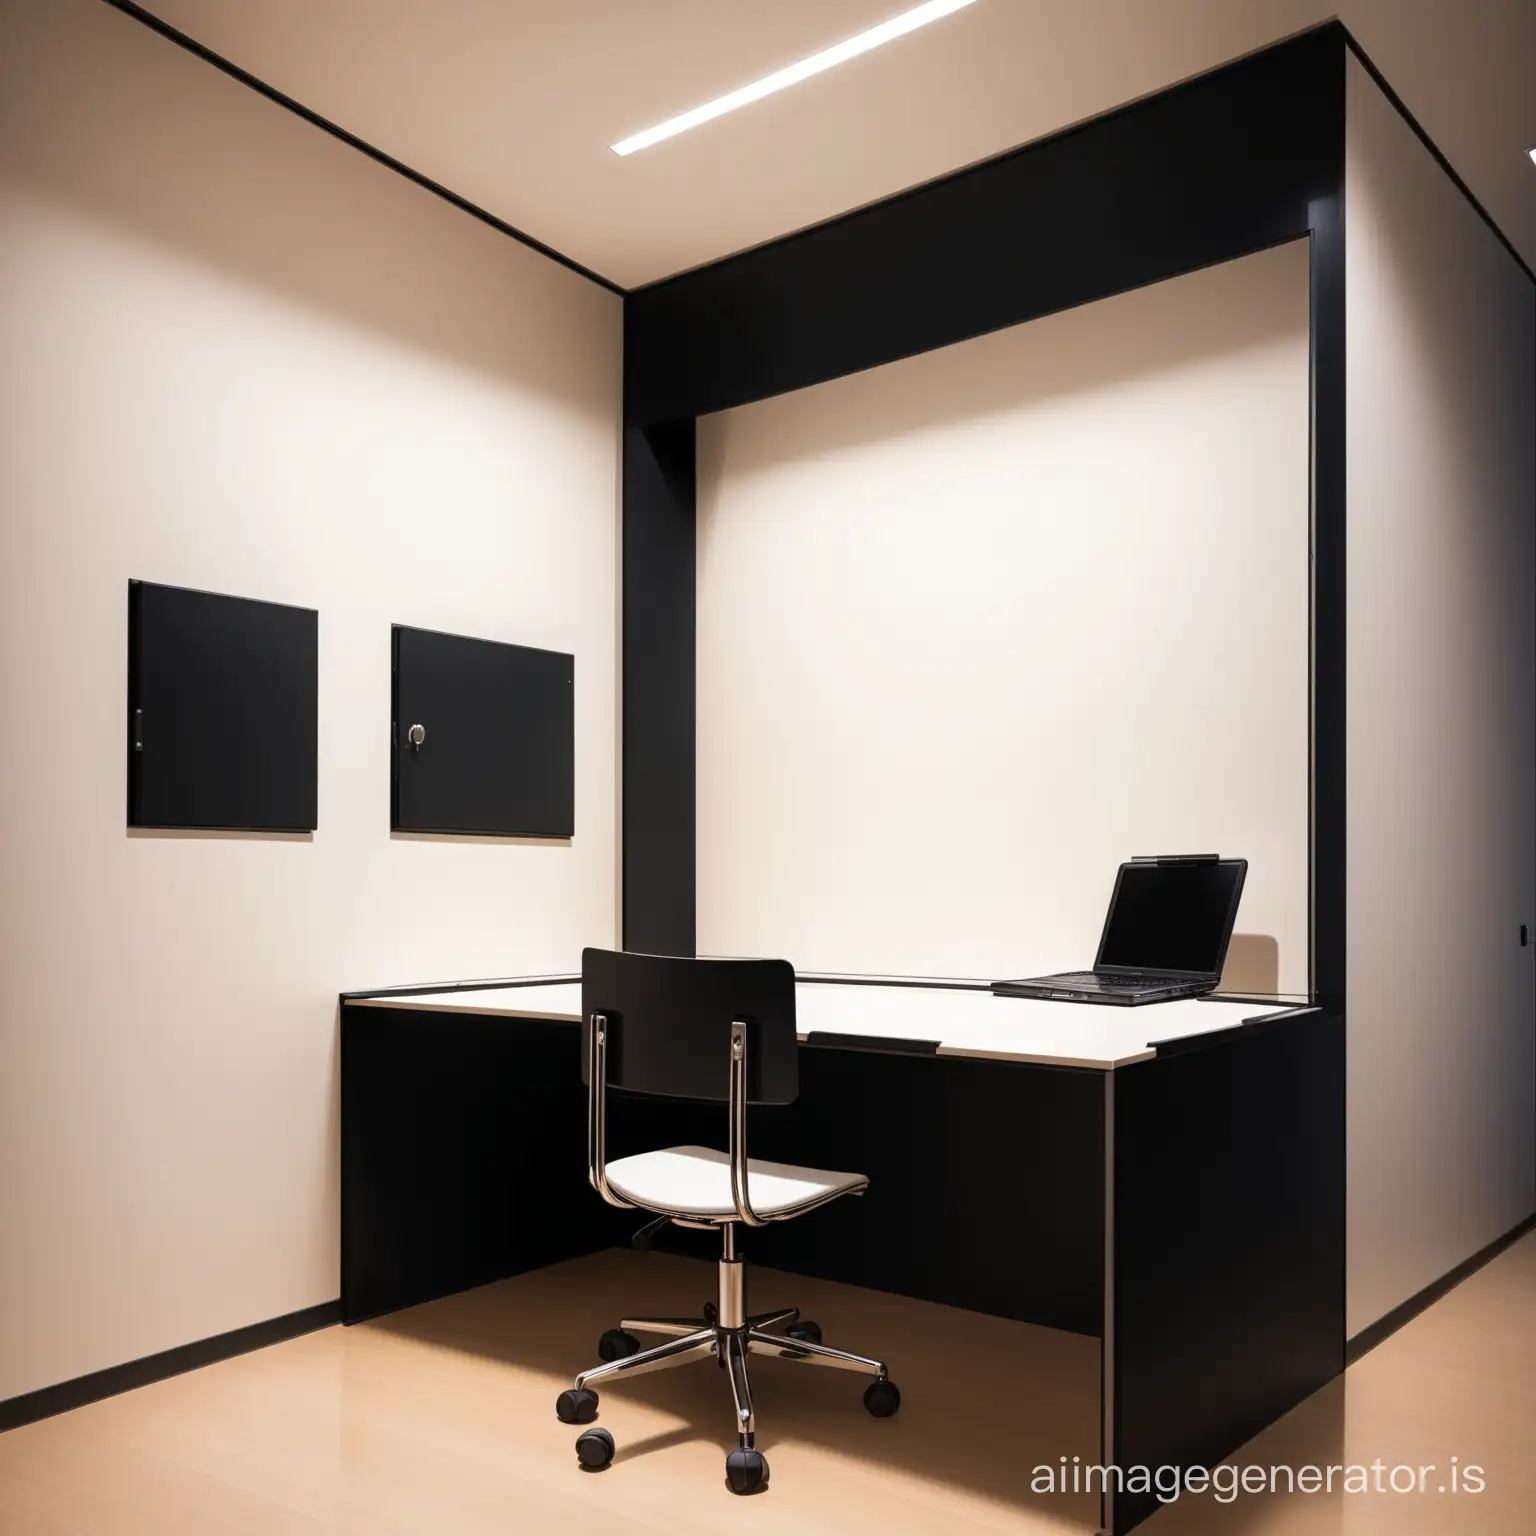 Childs-Study-Room-with-Minimalist-Black-Square-Wall-Art